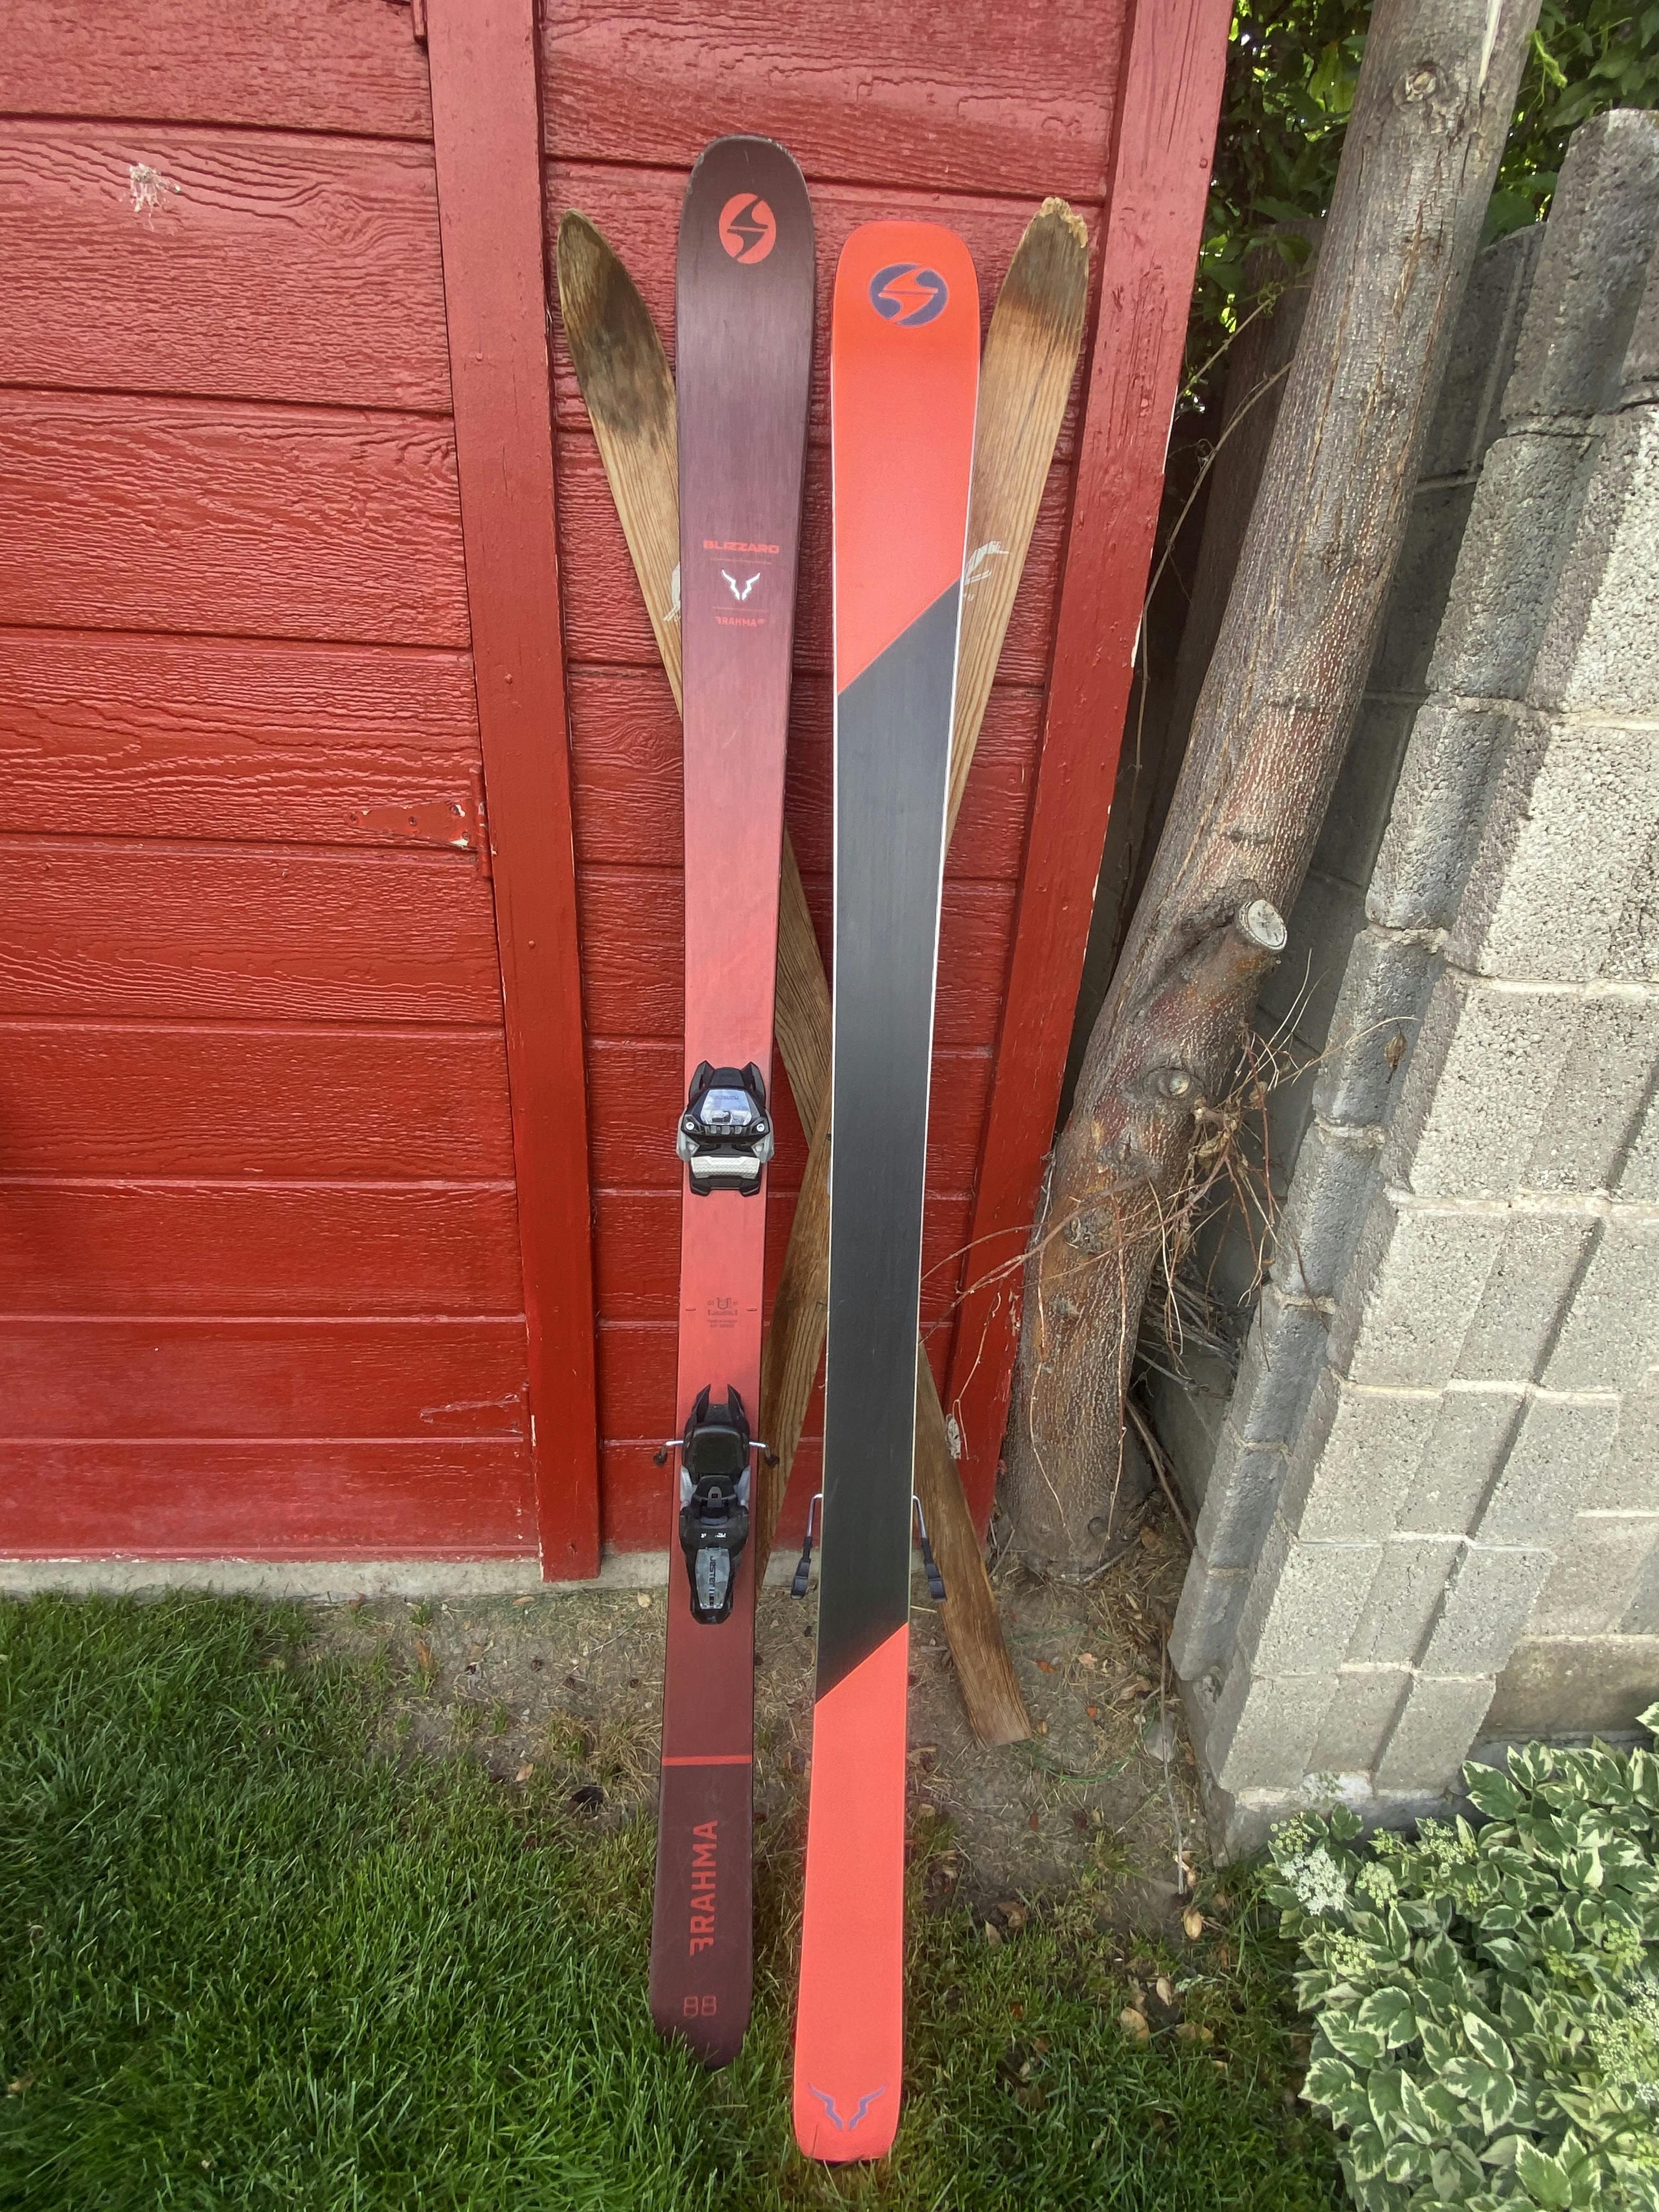 The bottom and top of the Blizzard Brahma 88 skis.